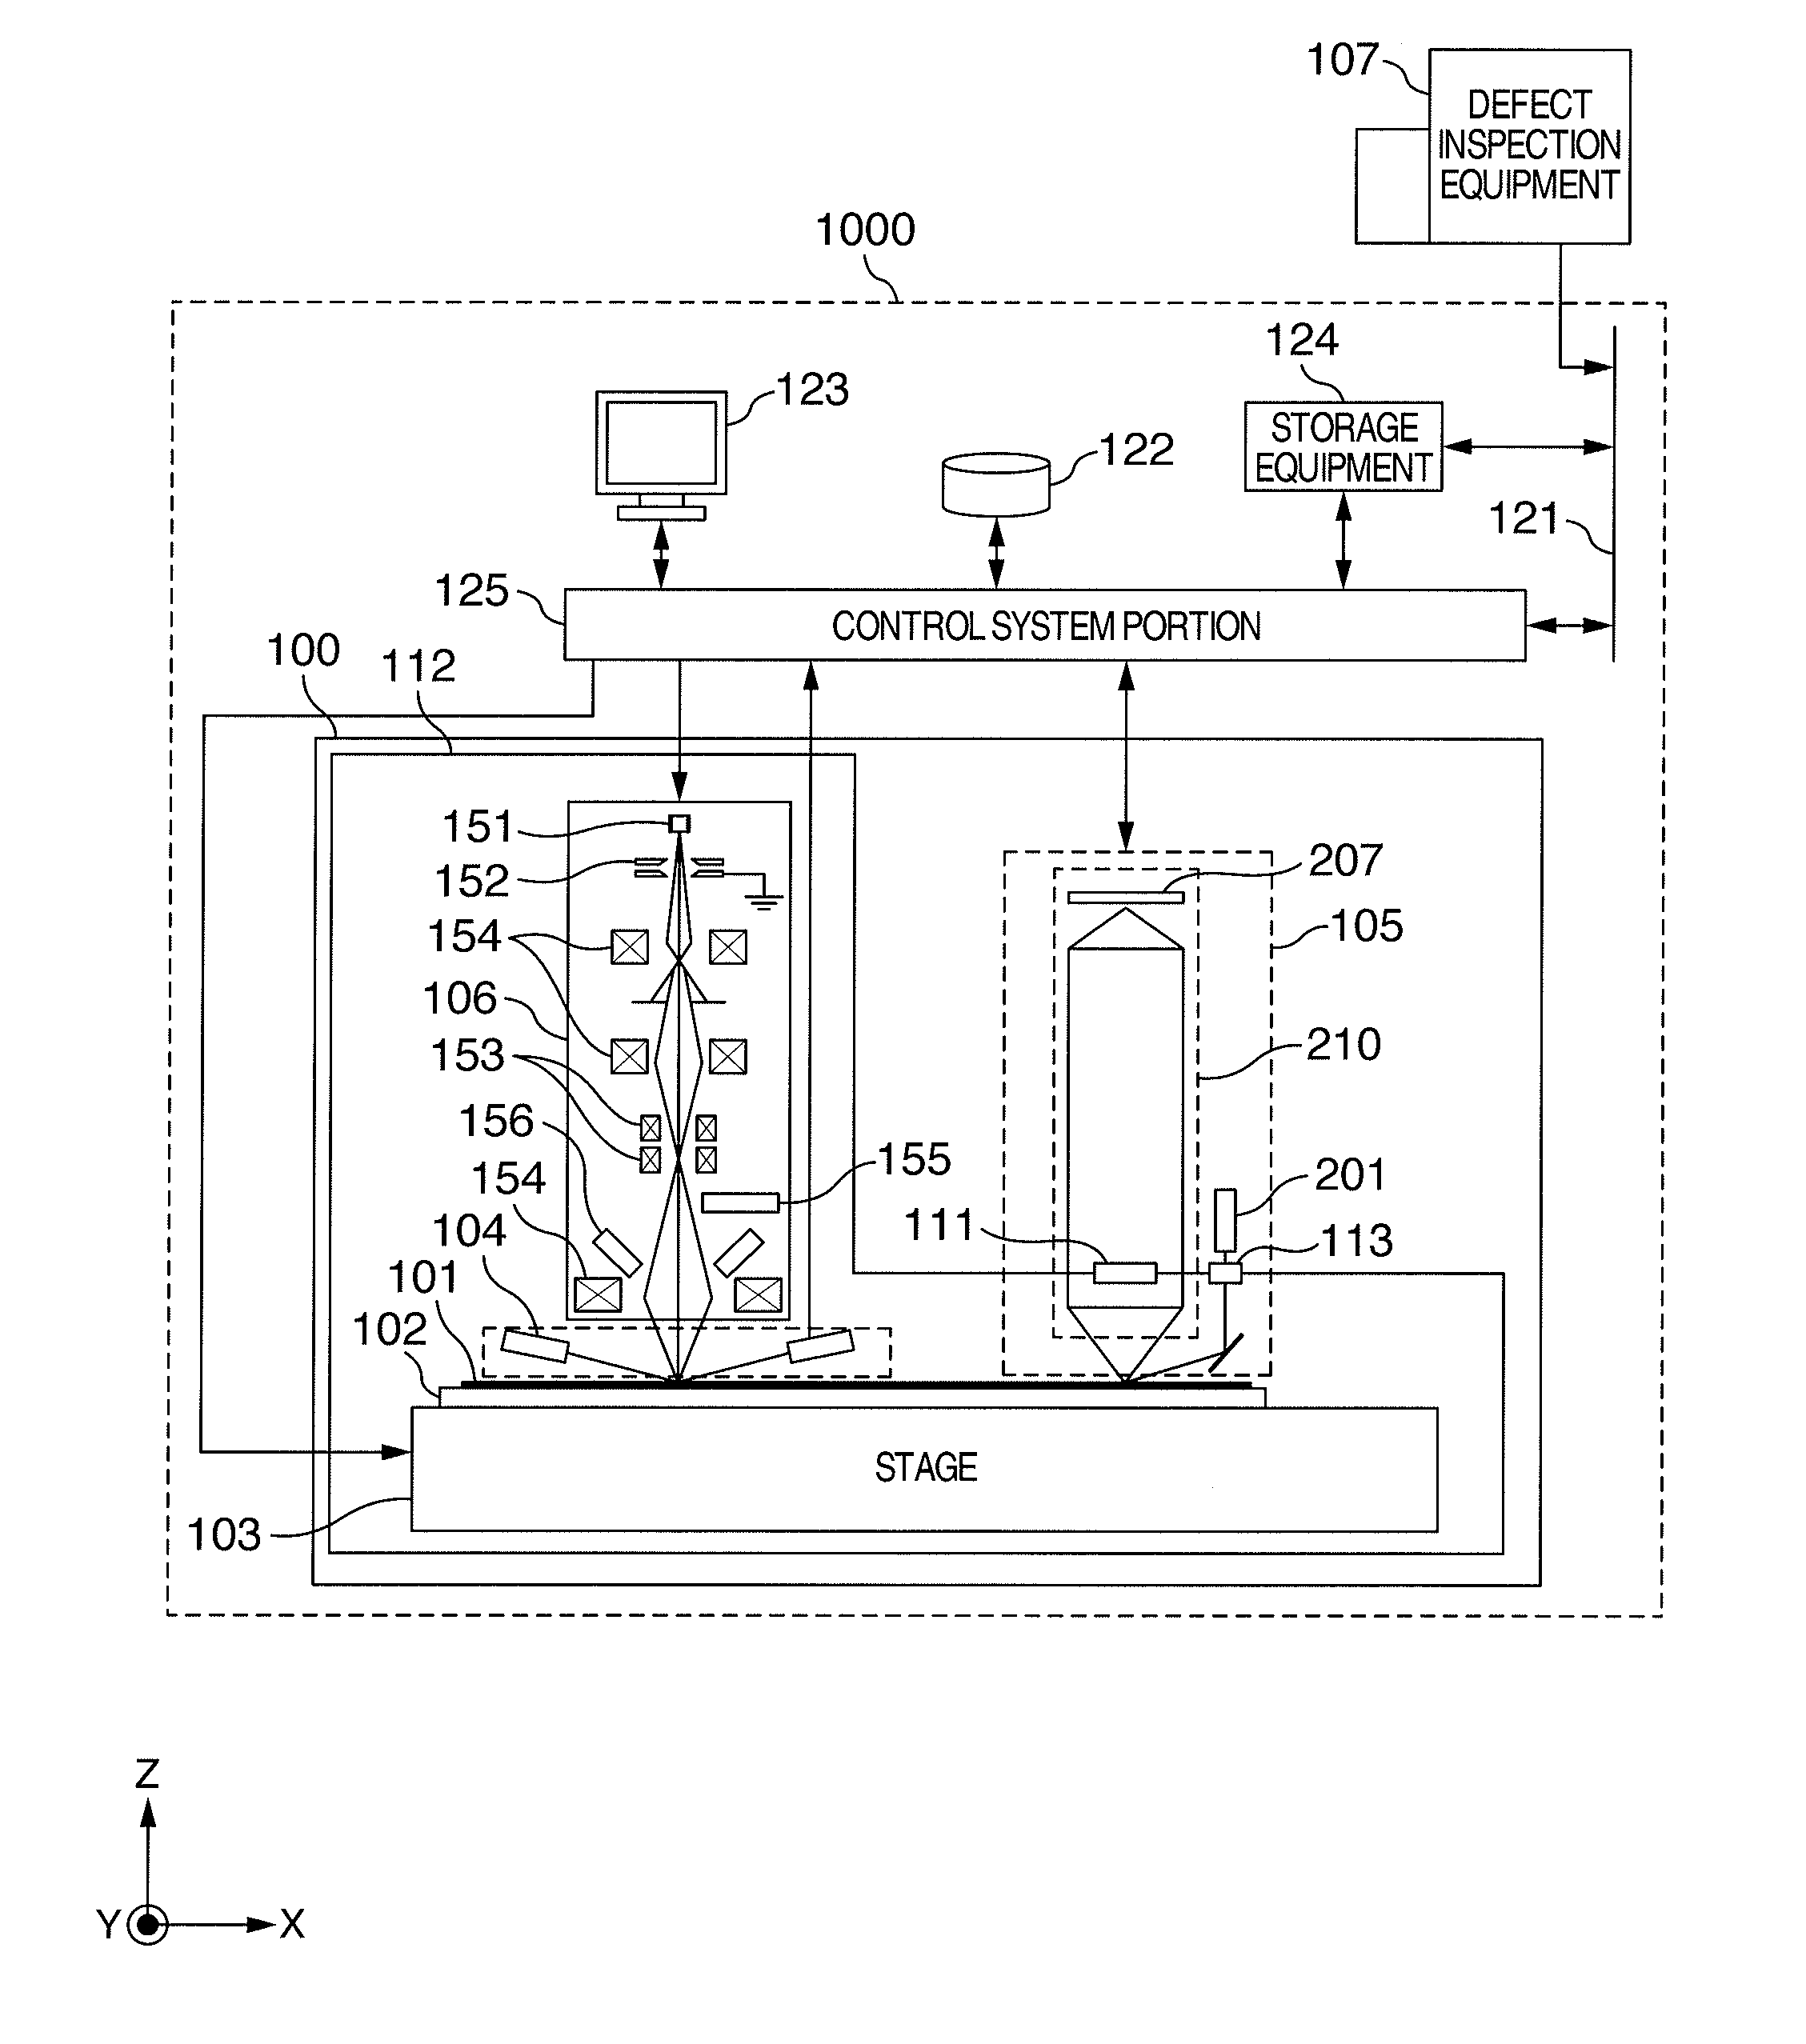 Method and Apparatus for Reviewing Defects